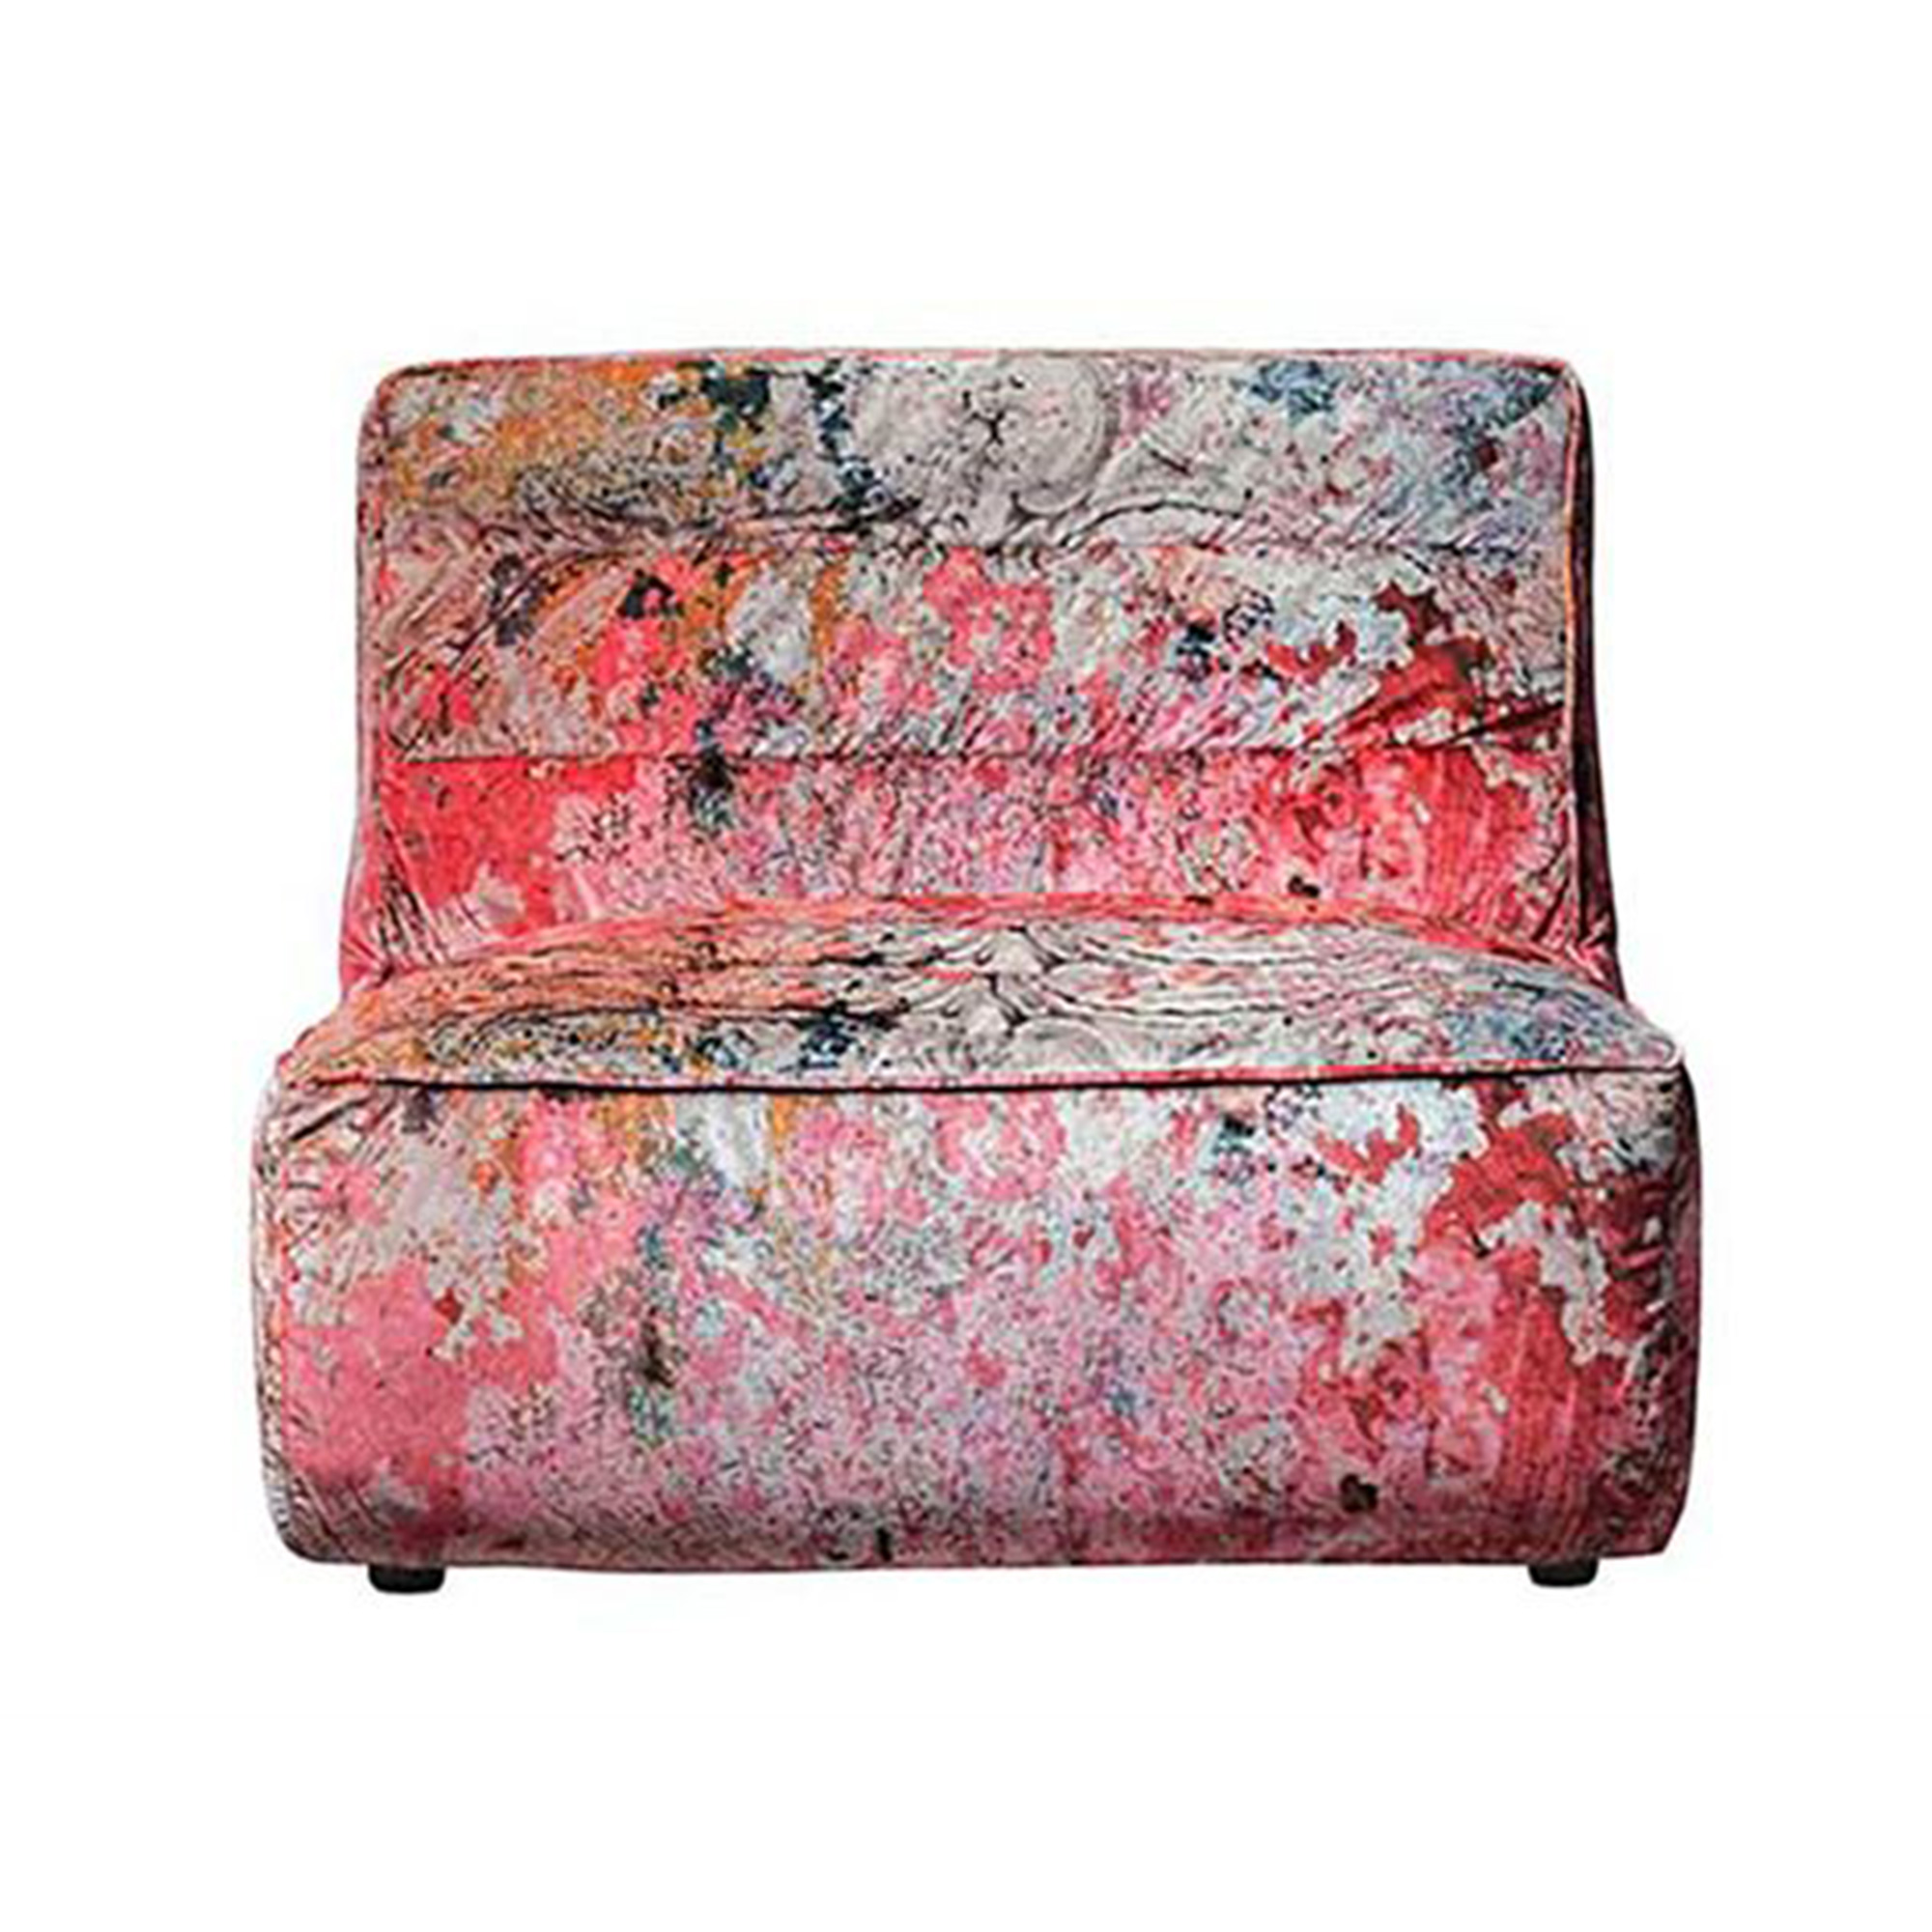 Timothy Oulton Shabby Sectional 1 Seater Modular Sofa, Pink Fabric | Barker & Stonehouse